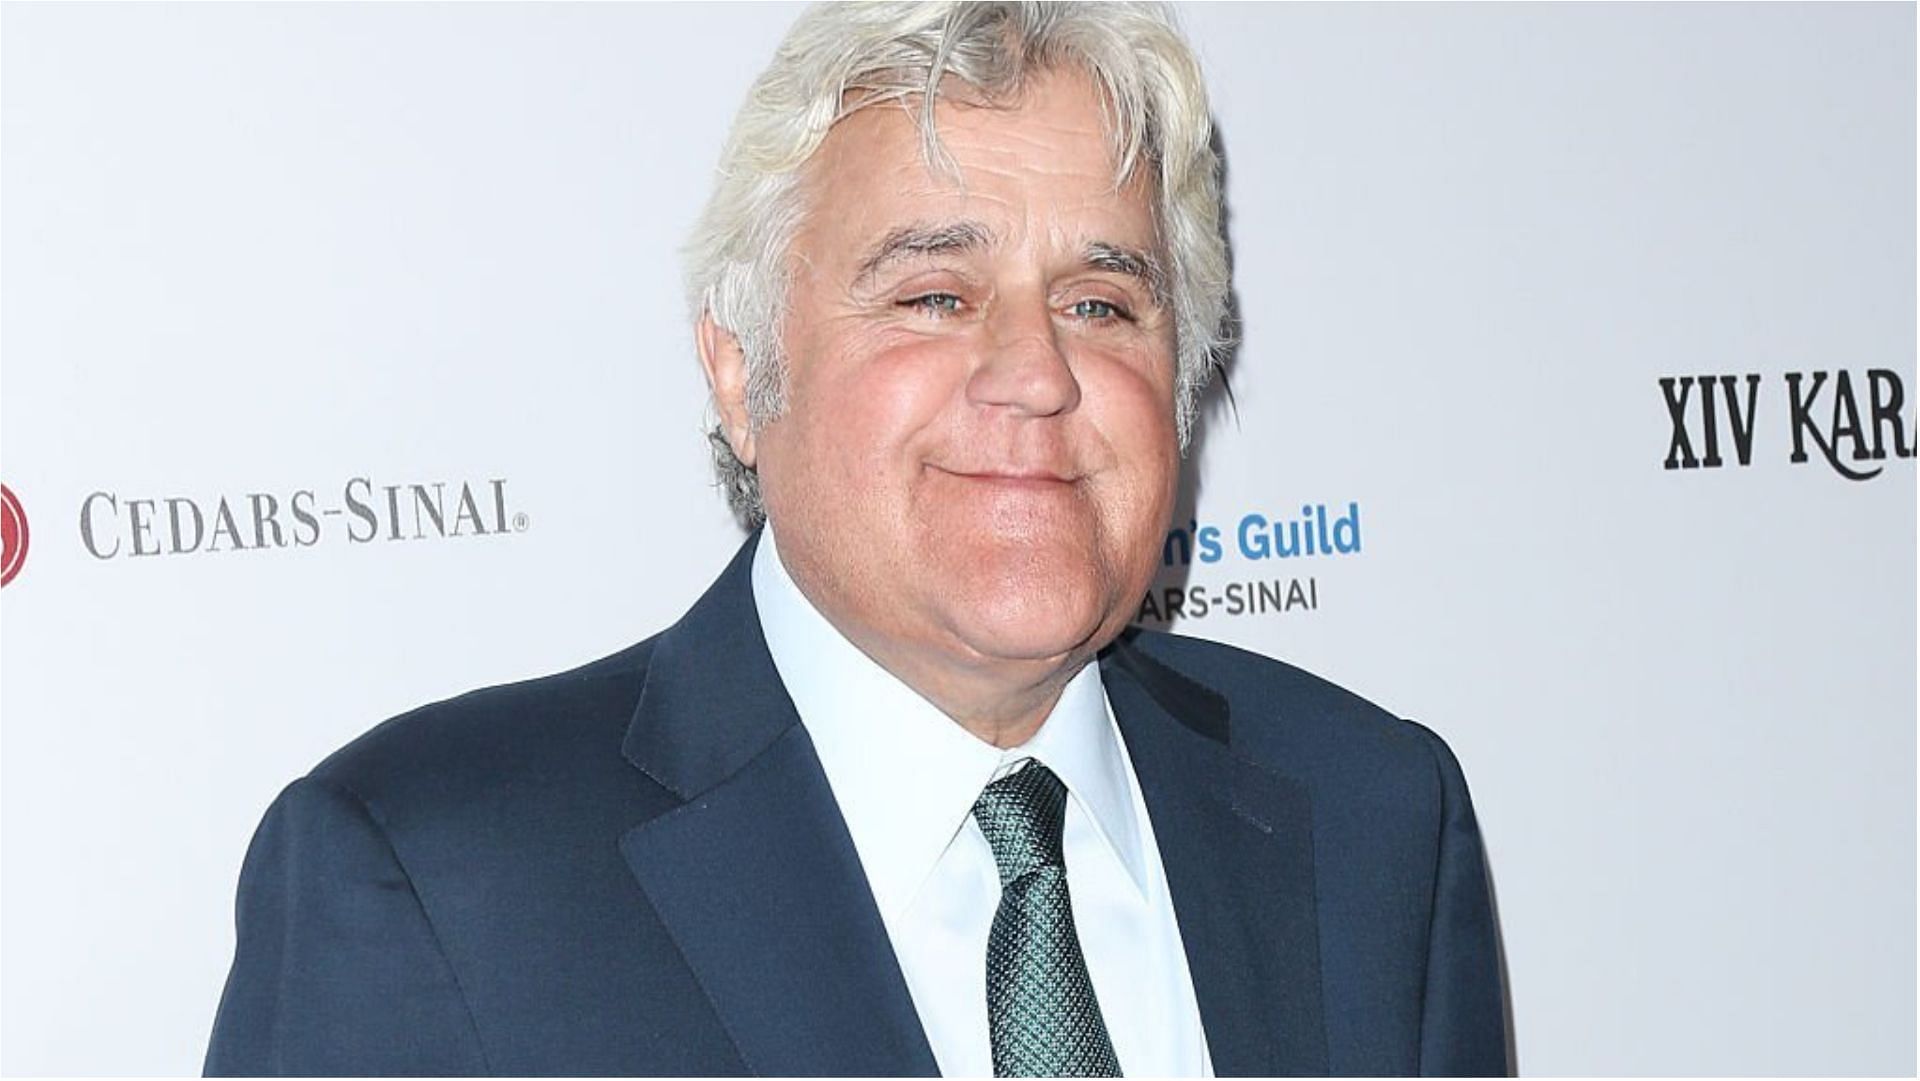 Jay Leno suffered serious burns after a car at his Los Angeles garage started burning (Image via Paul Archuleta/Getty Images)